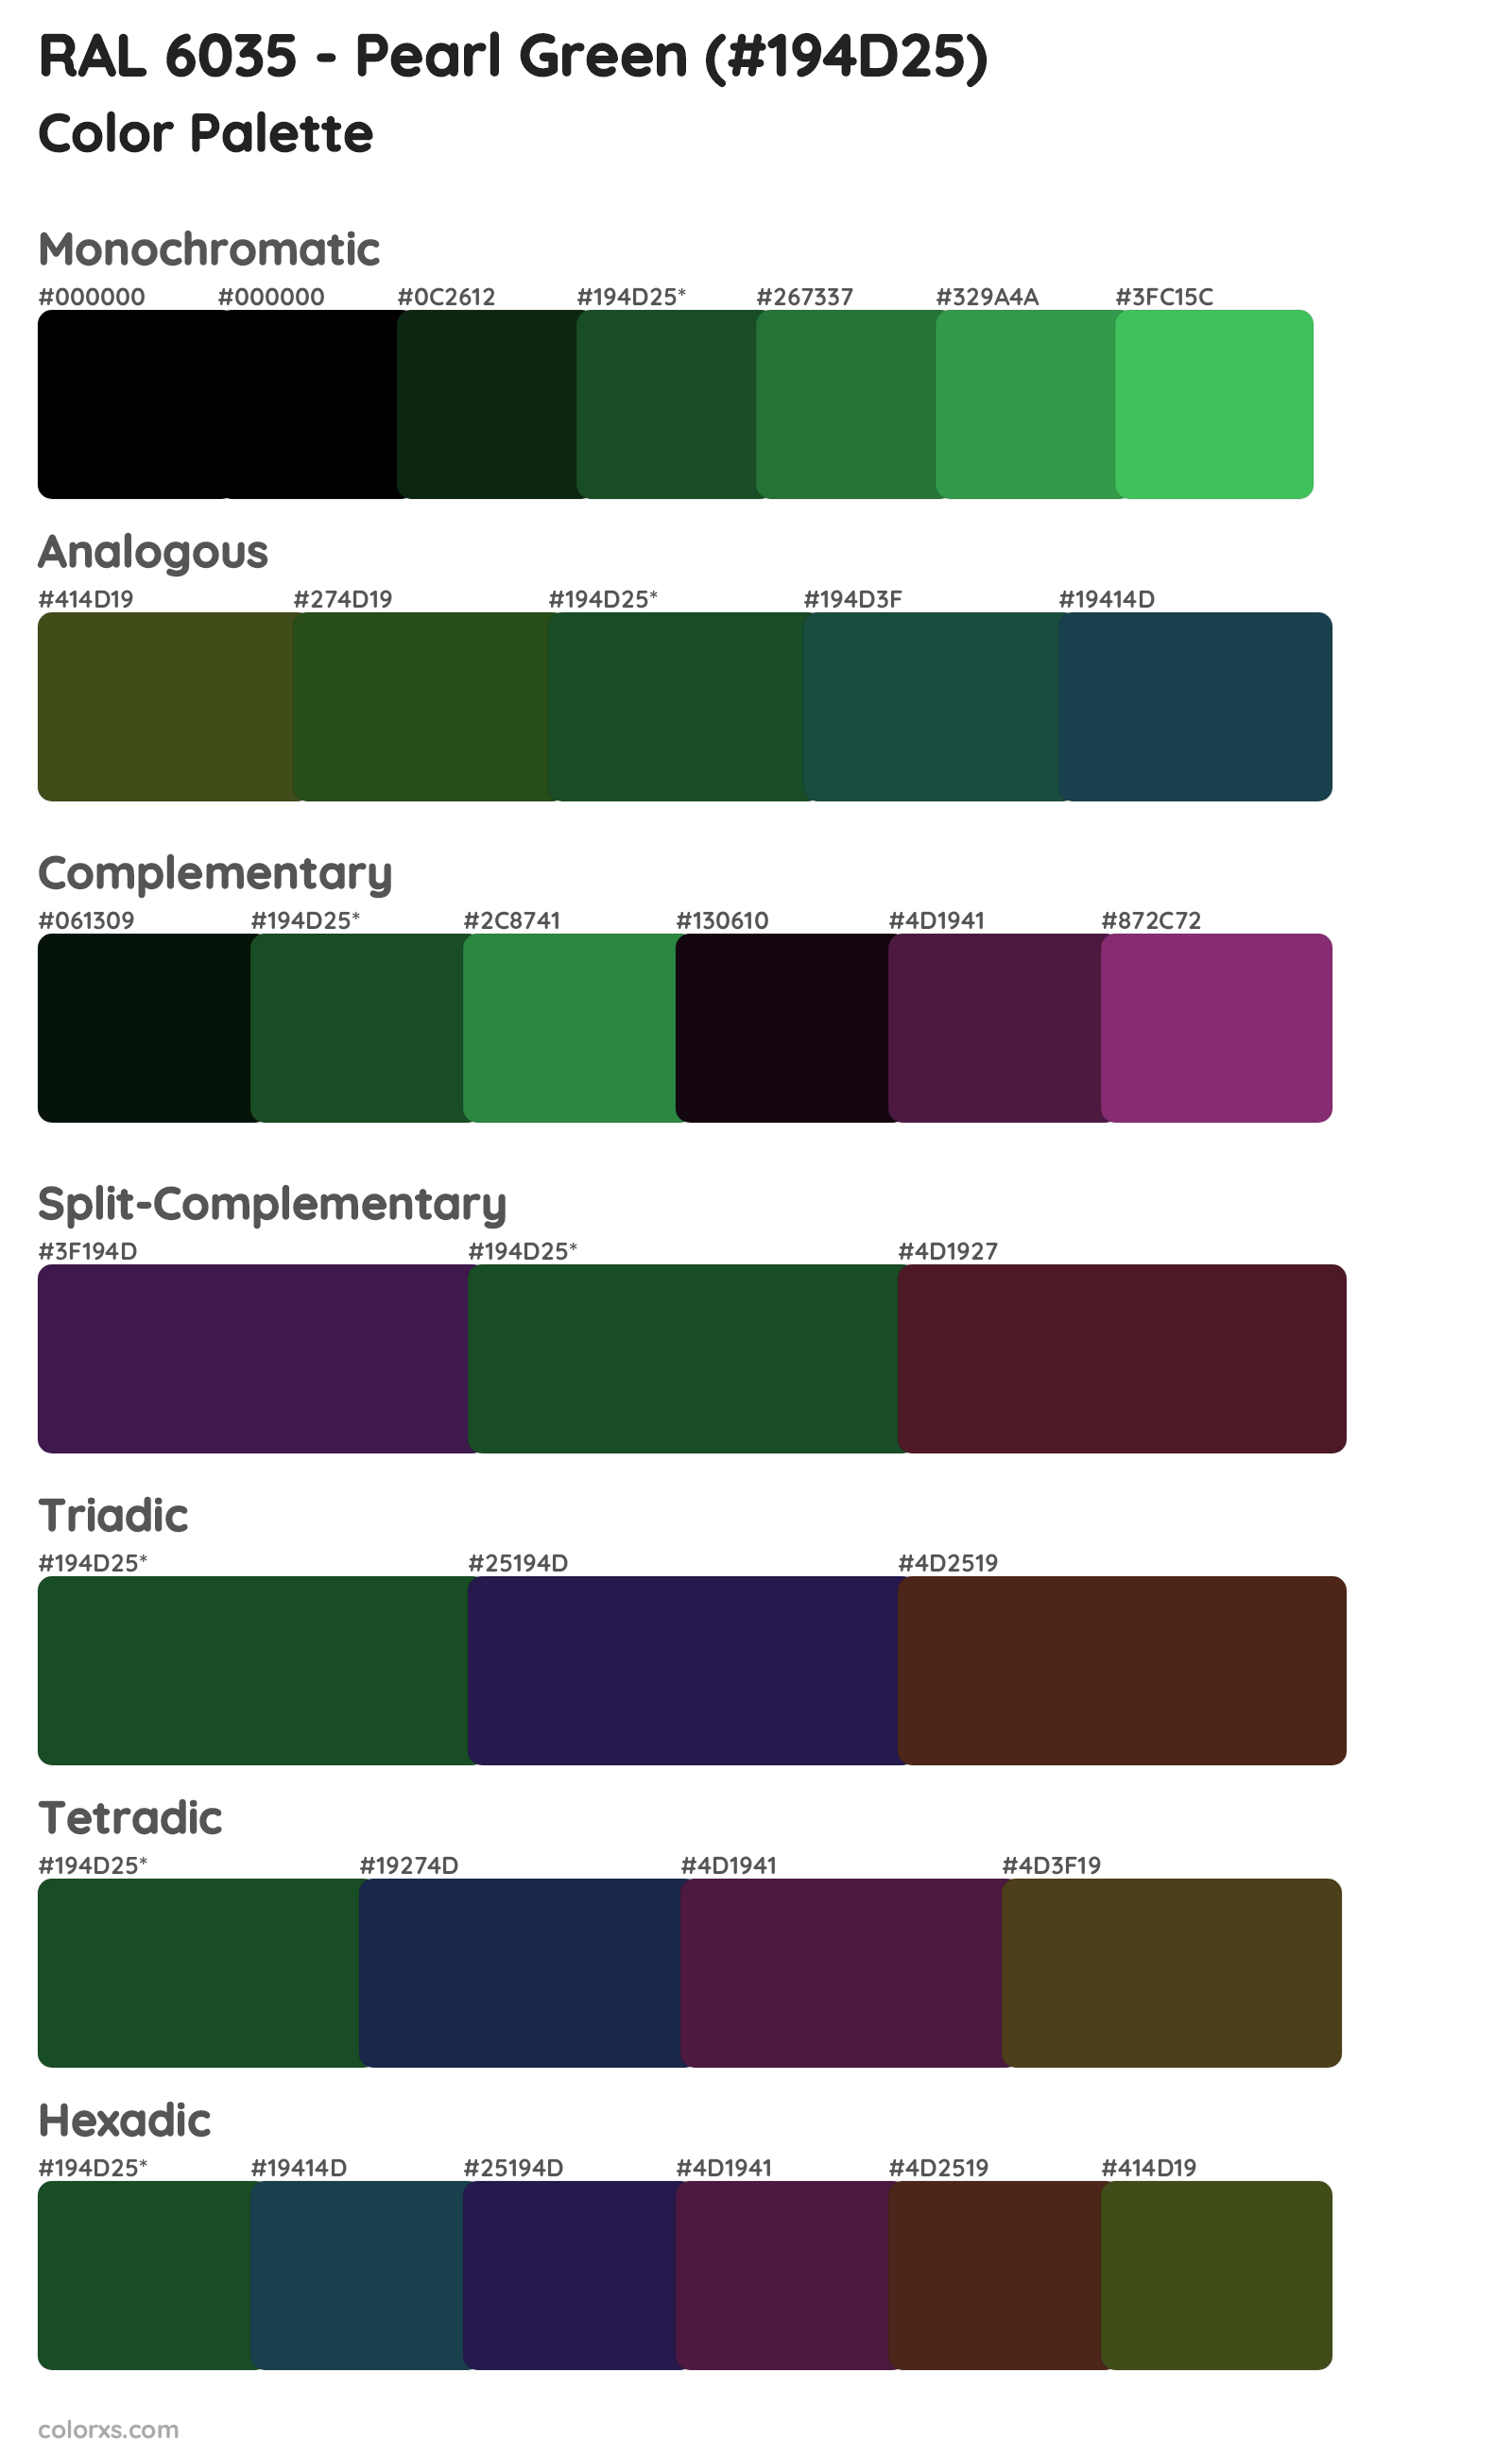 RAL 6035 - Pearl Green Color Scheme Palettes